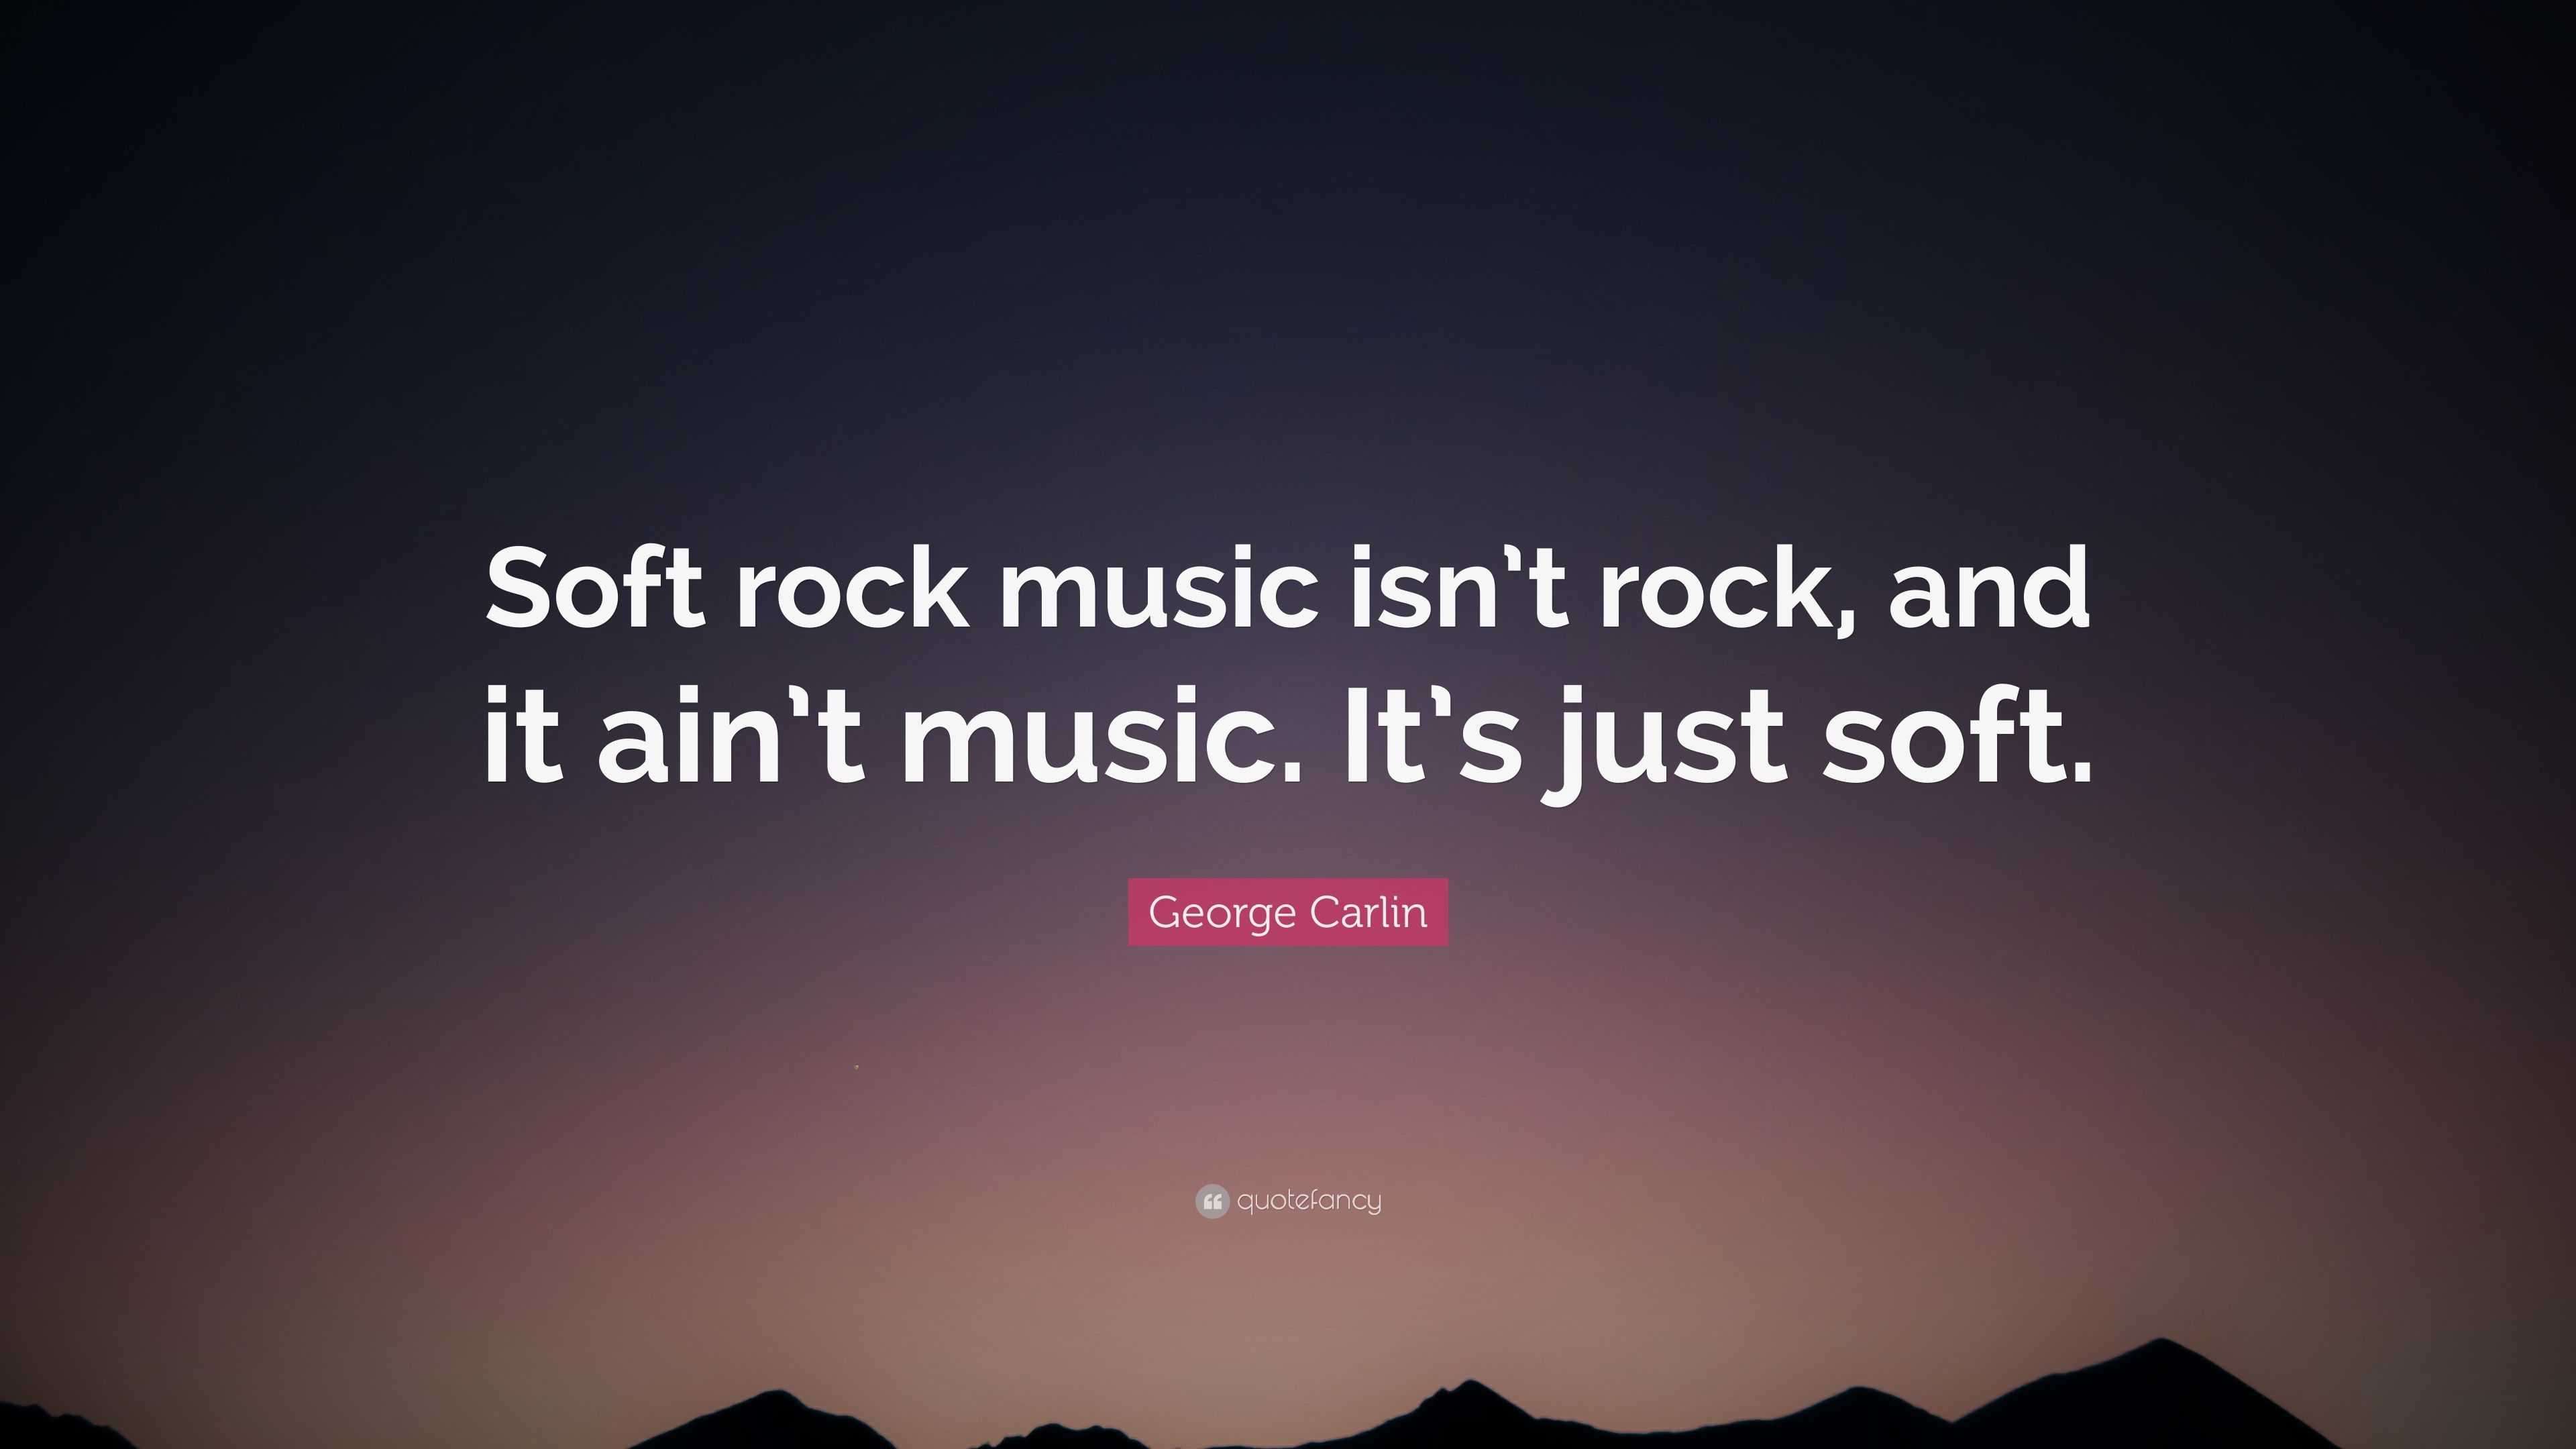 George Carlin Quote: “Soft rock music isn't rock, and it ain't music. It's  just